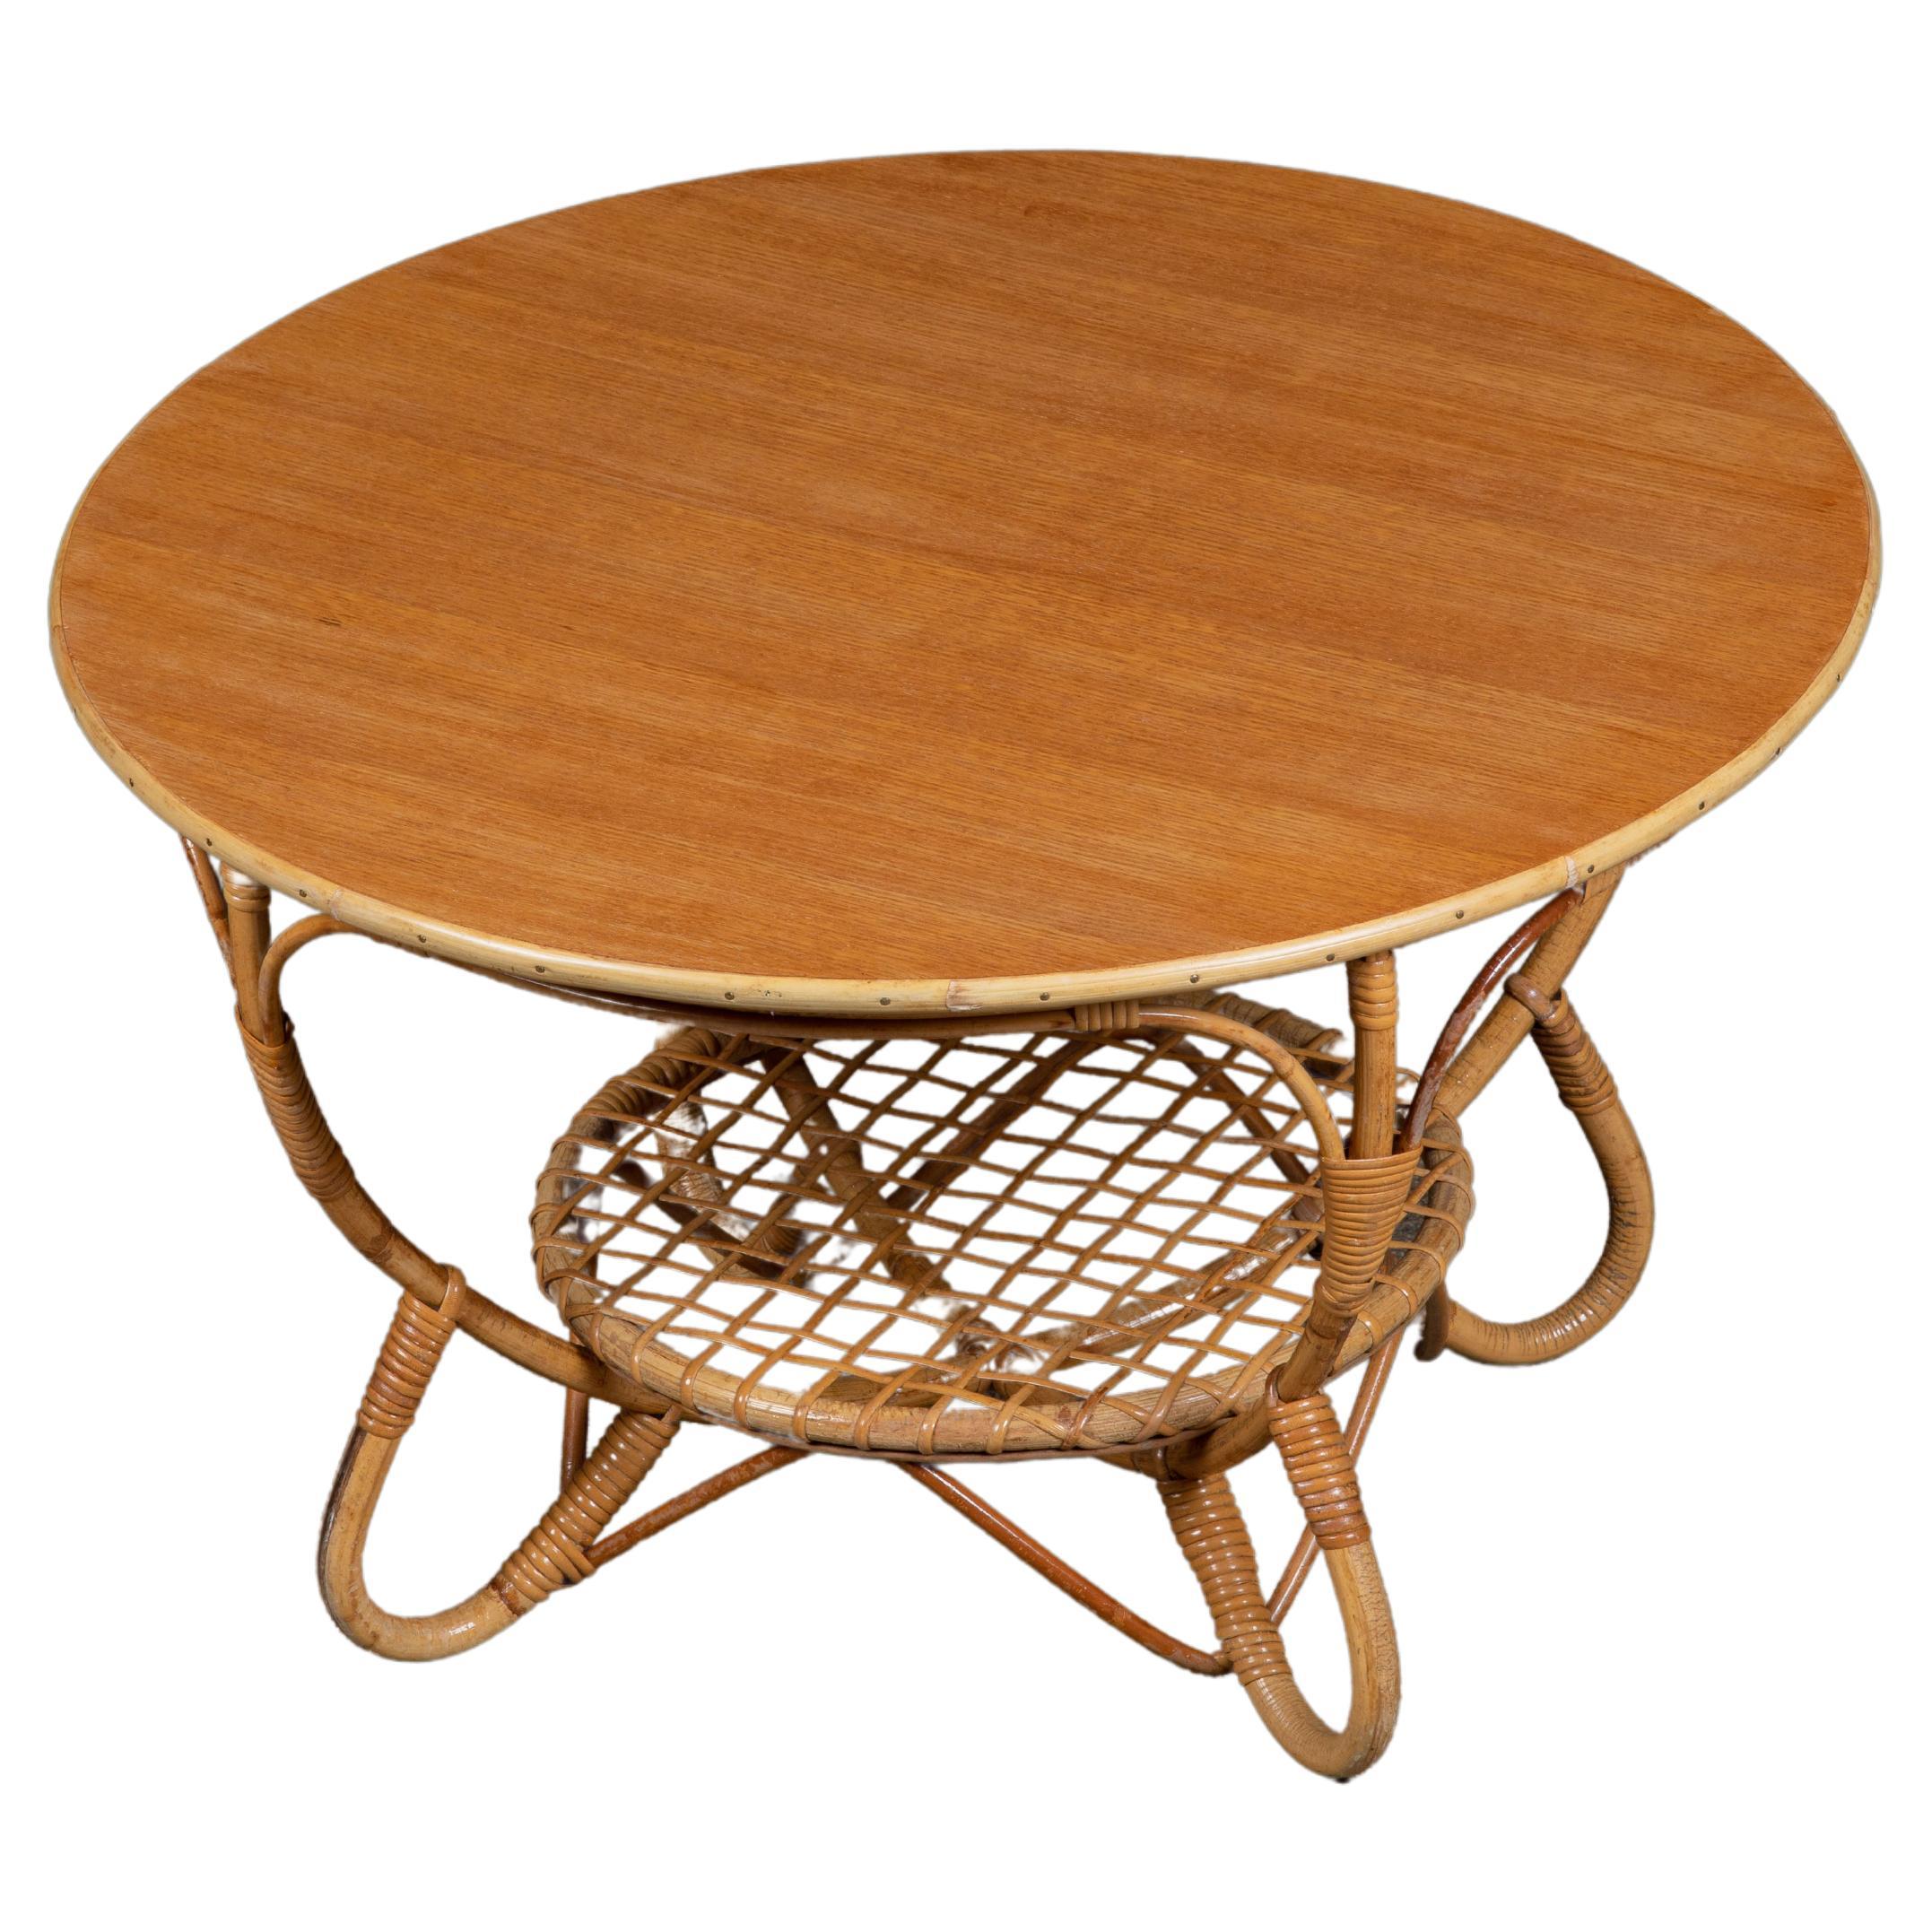 Mid-Century French Riviera Guéridon, Italy, 1960.

Typical of the French Riviera style, the curved and delicate shapes of this gueridon table adorn the space with a touch of elegance.

Both as a side table and as en end-table, it combines